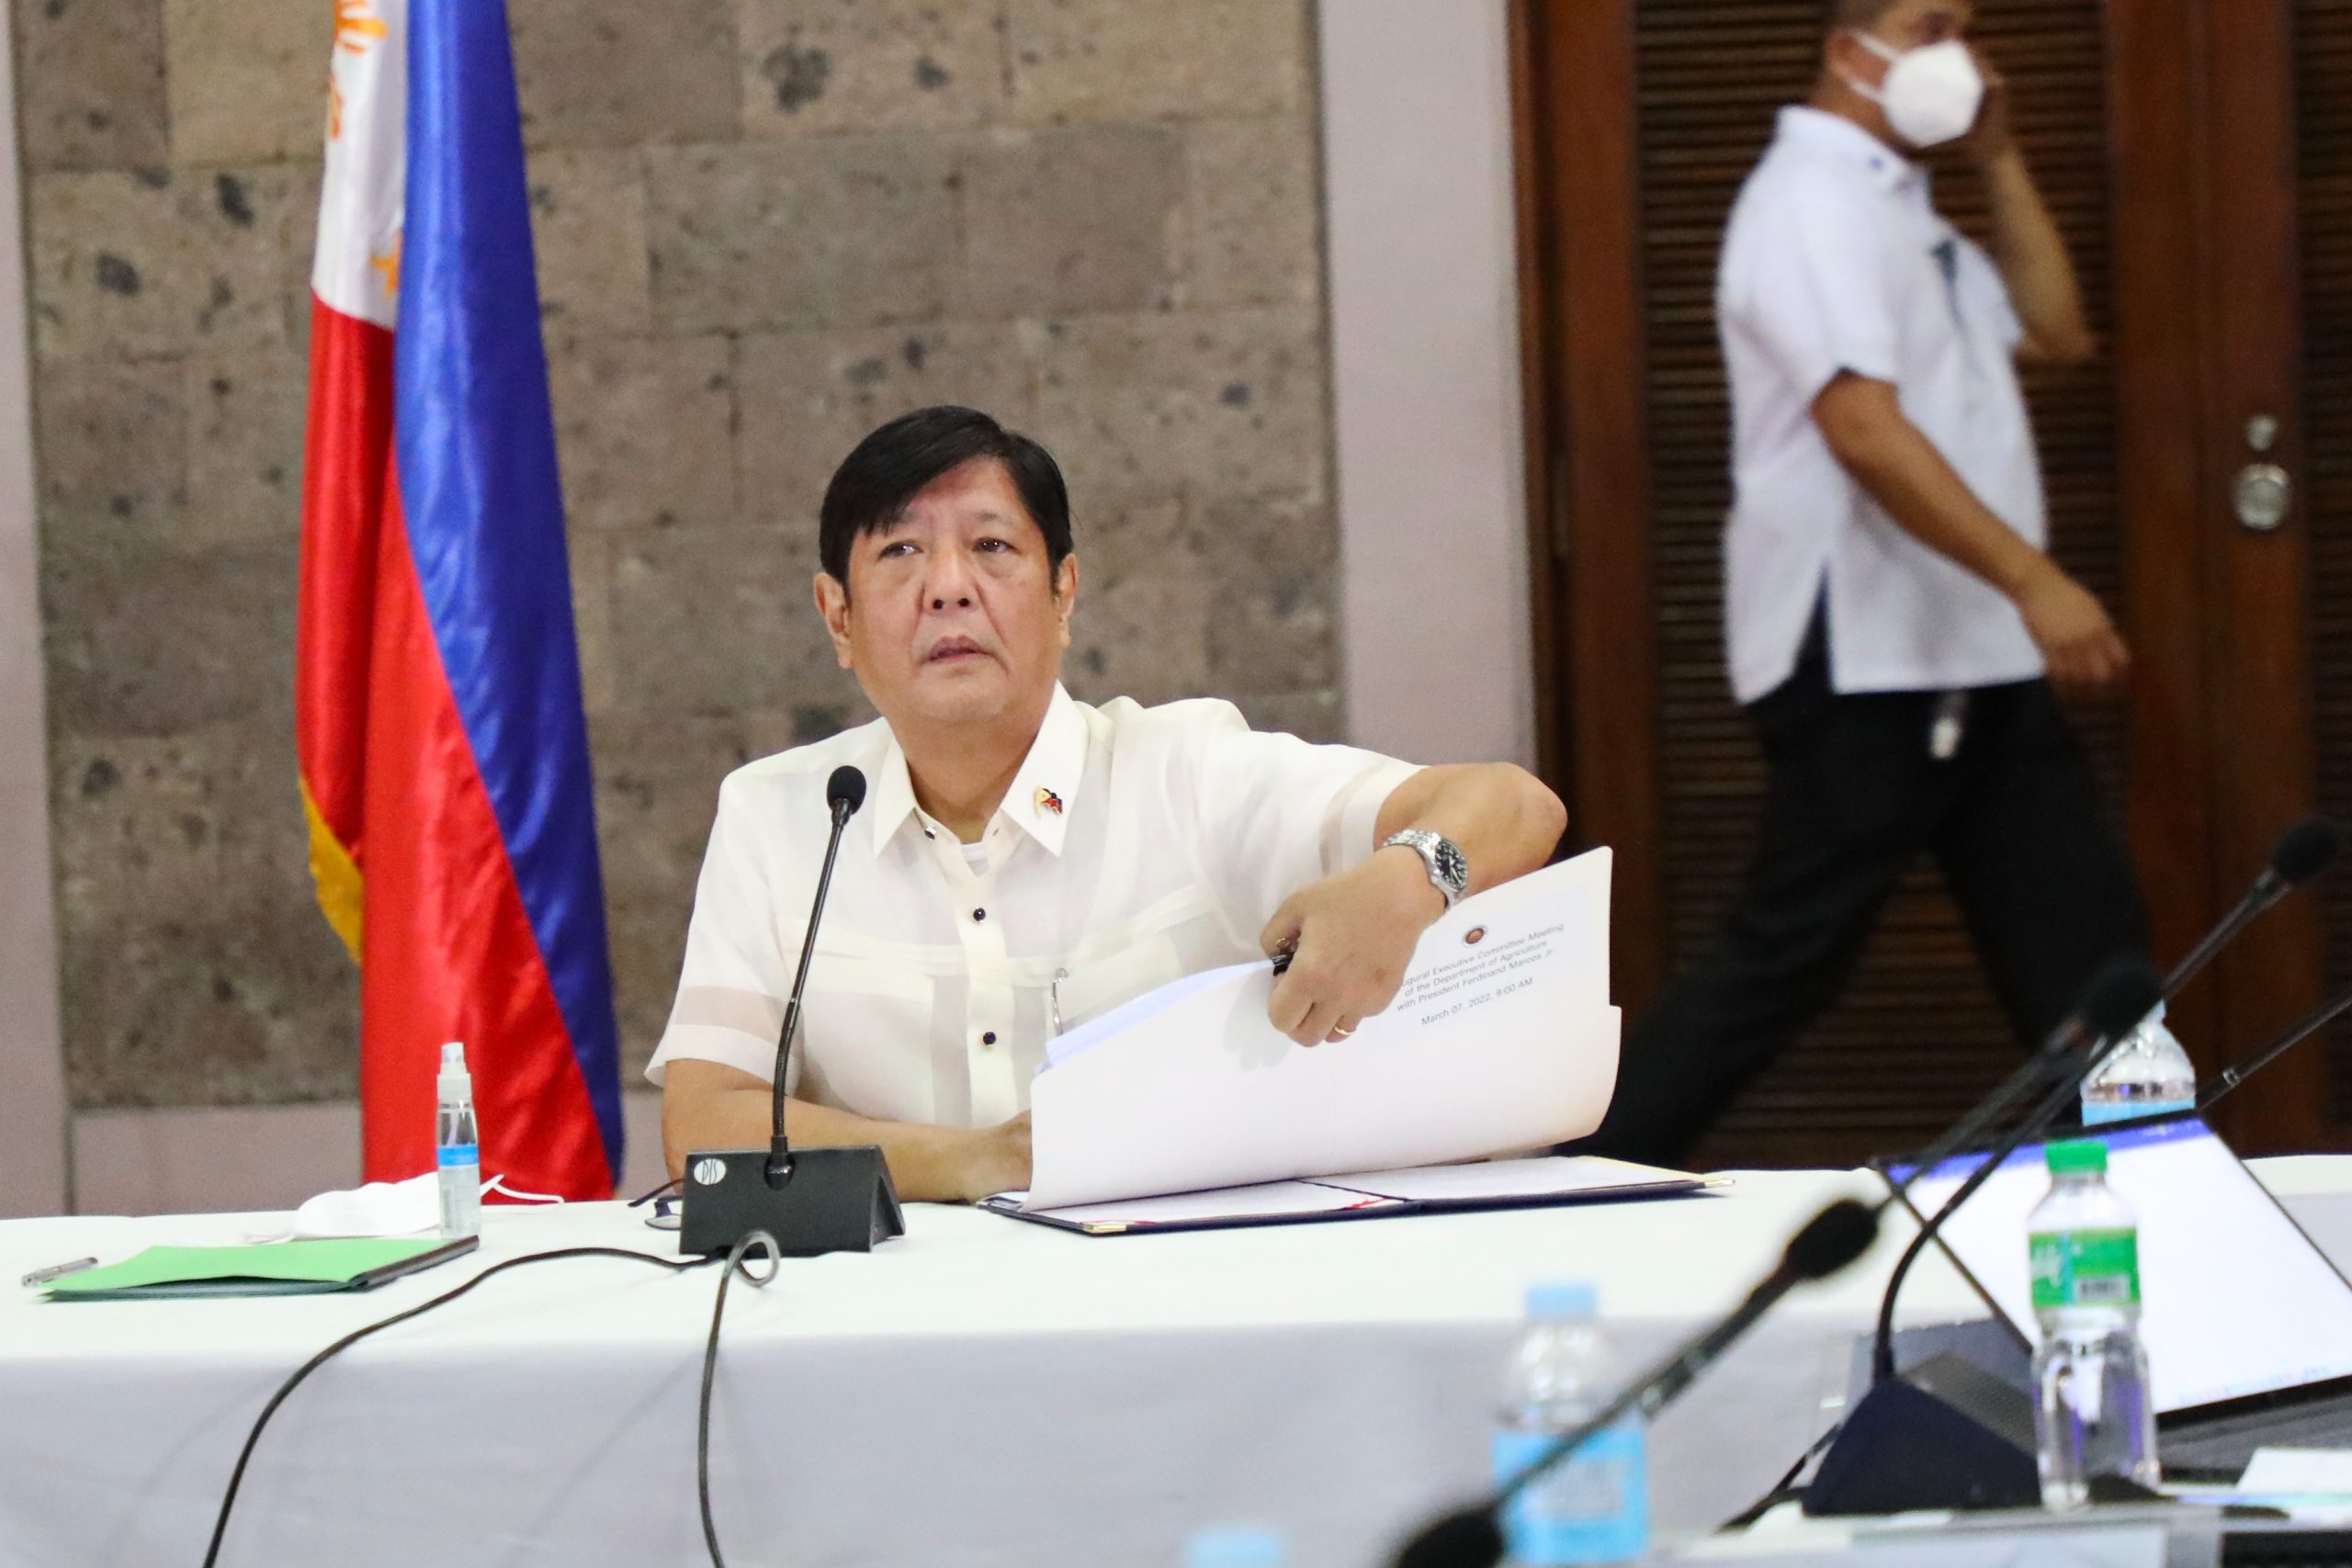 PBBM gives first directives to DA, lists increasing food supply as priority